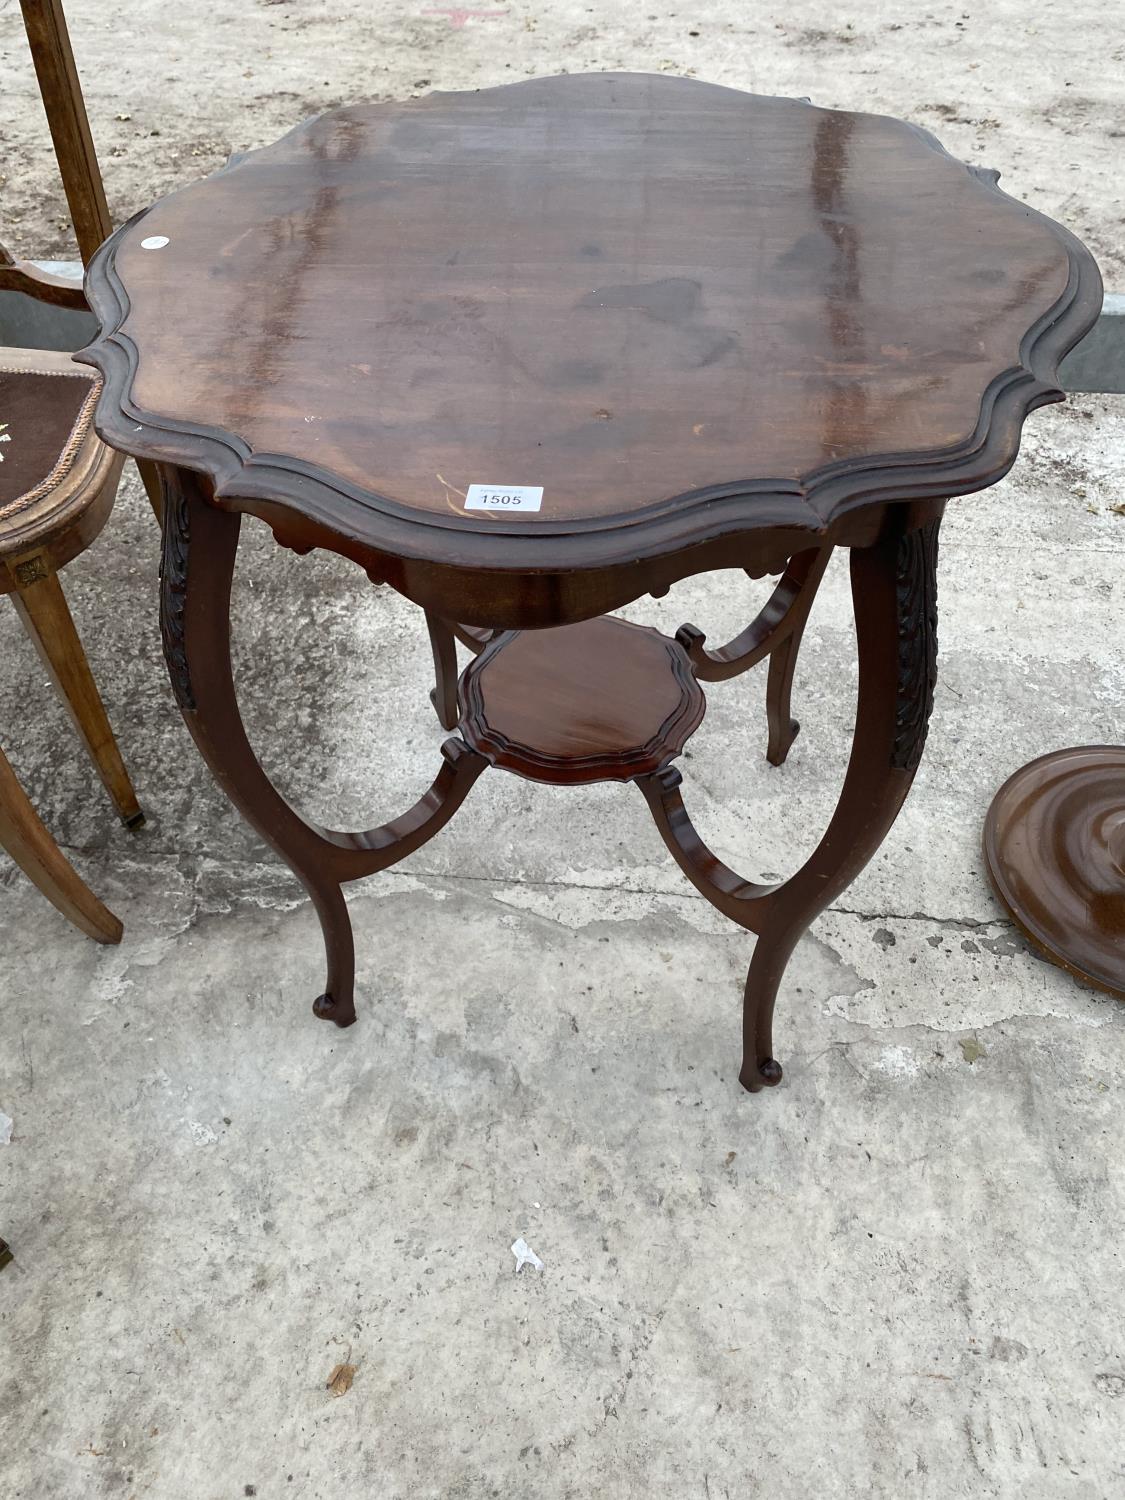 A MAHOGANY SIDE TABLE WITH LOWER SHELF